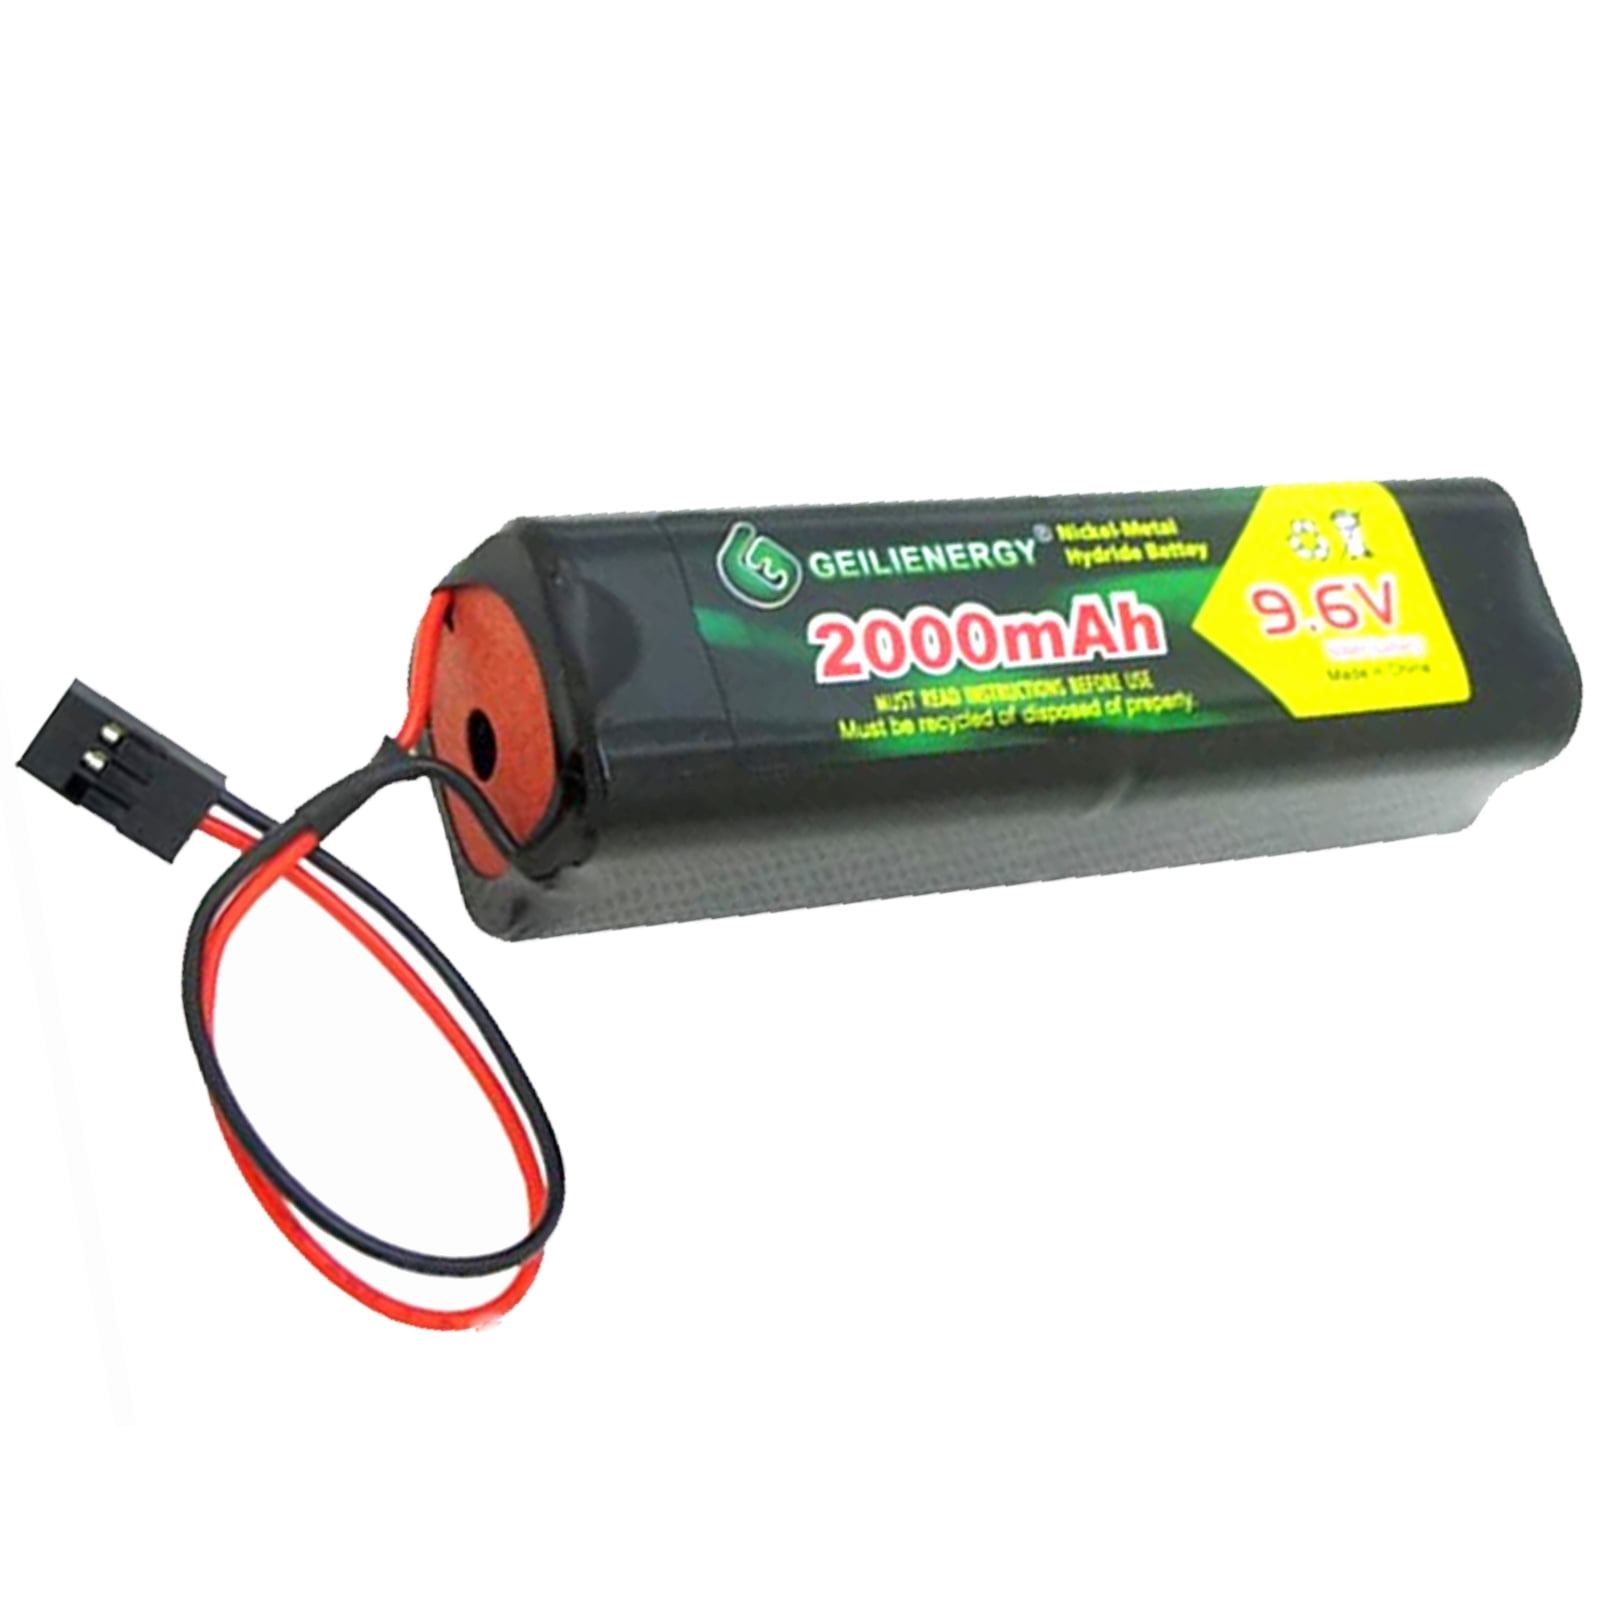 1pcs 9.6v 2000mah Square Futaba Geilienergy Battery for RC Airplanes Cars Heli for sale online 